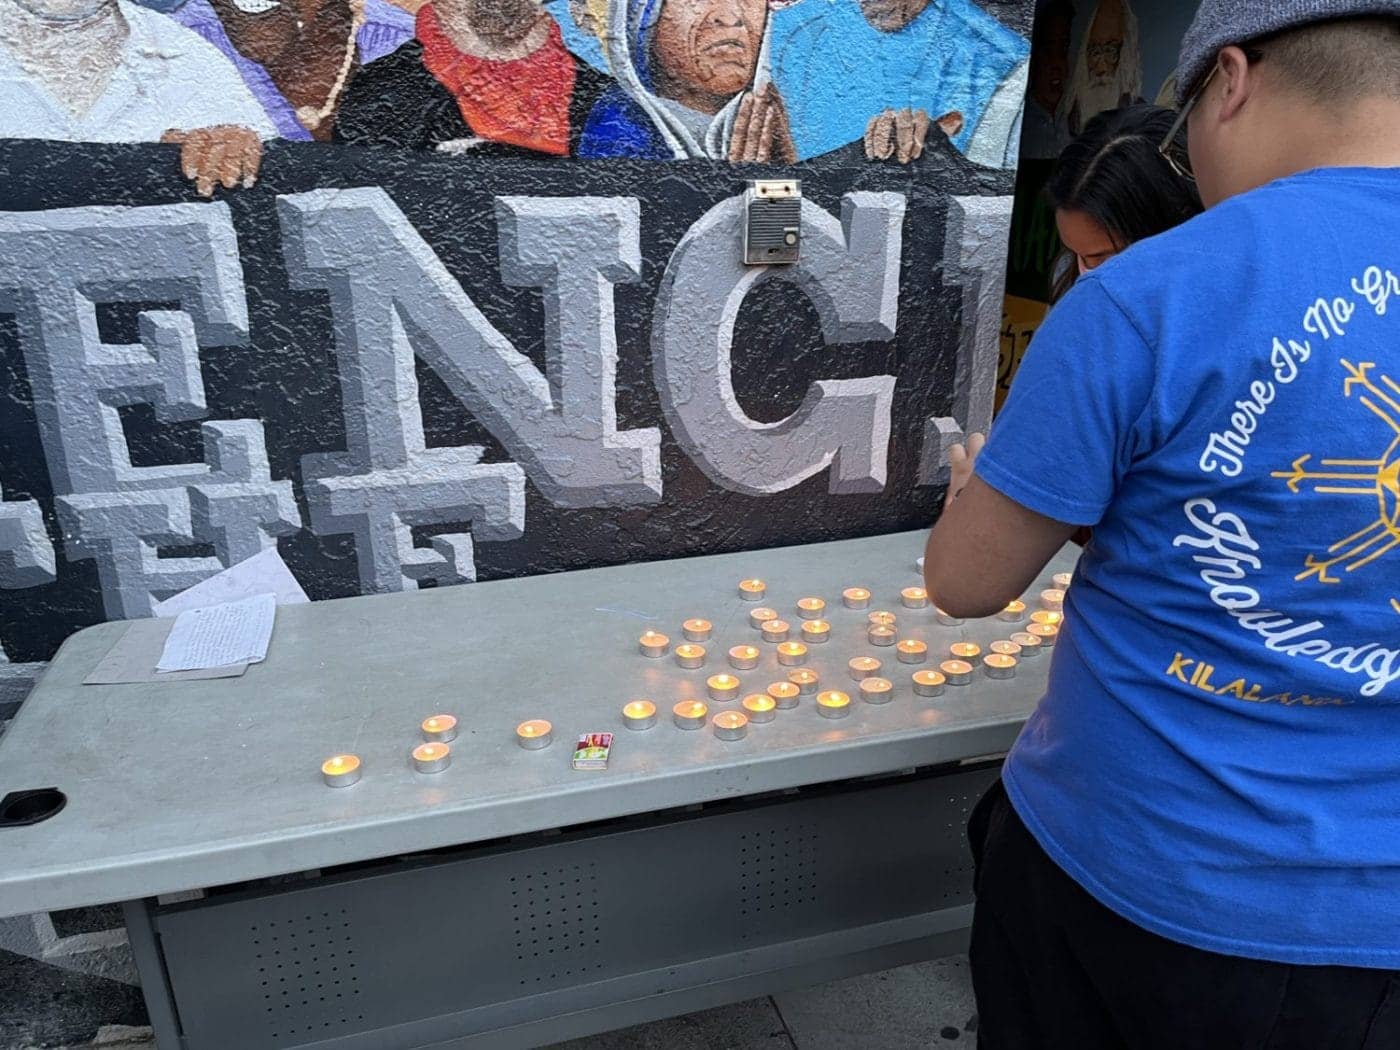 Candle-lighting-United-Playaz-rally-040522-1400x1050, ‘We are in a battle for our city’: Community leaders gather to address weekend of violence in SF , Local News & Views News & Views 